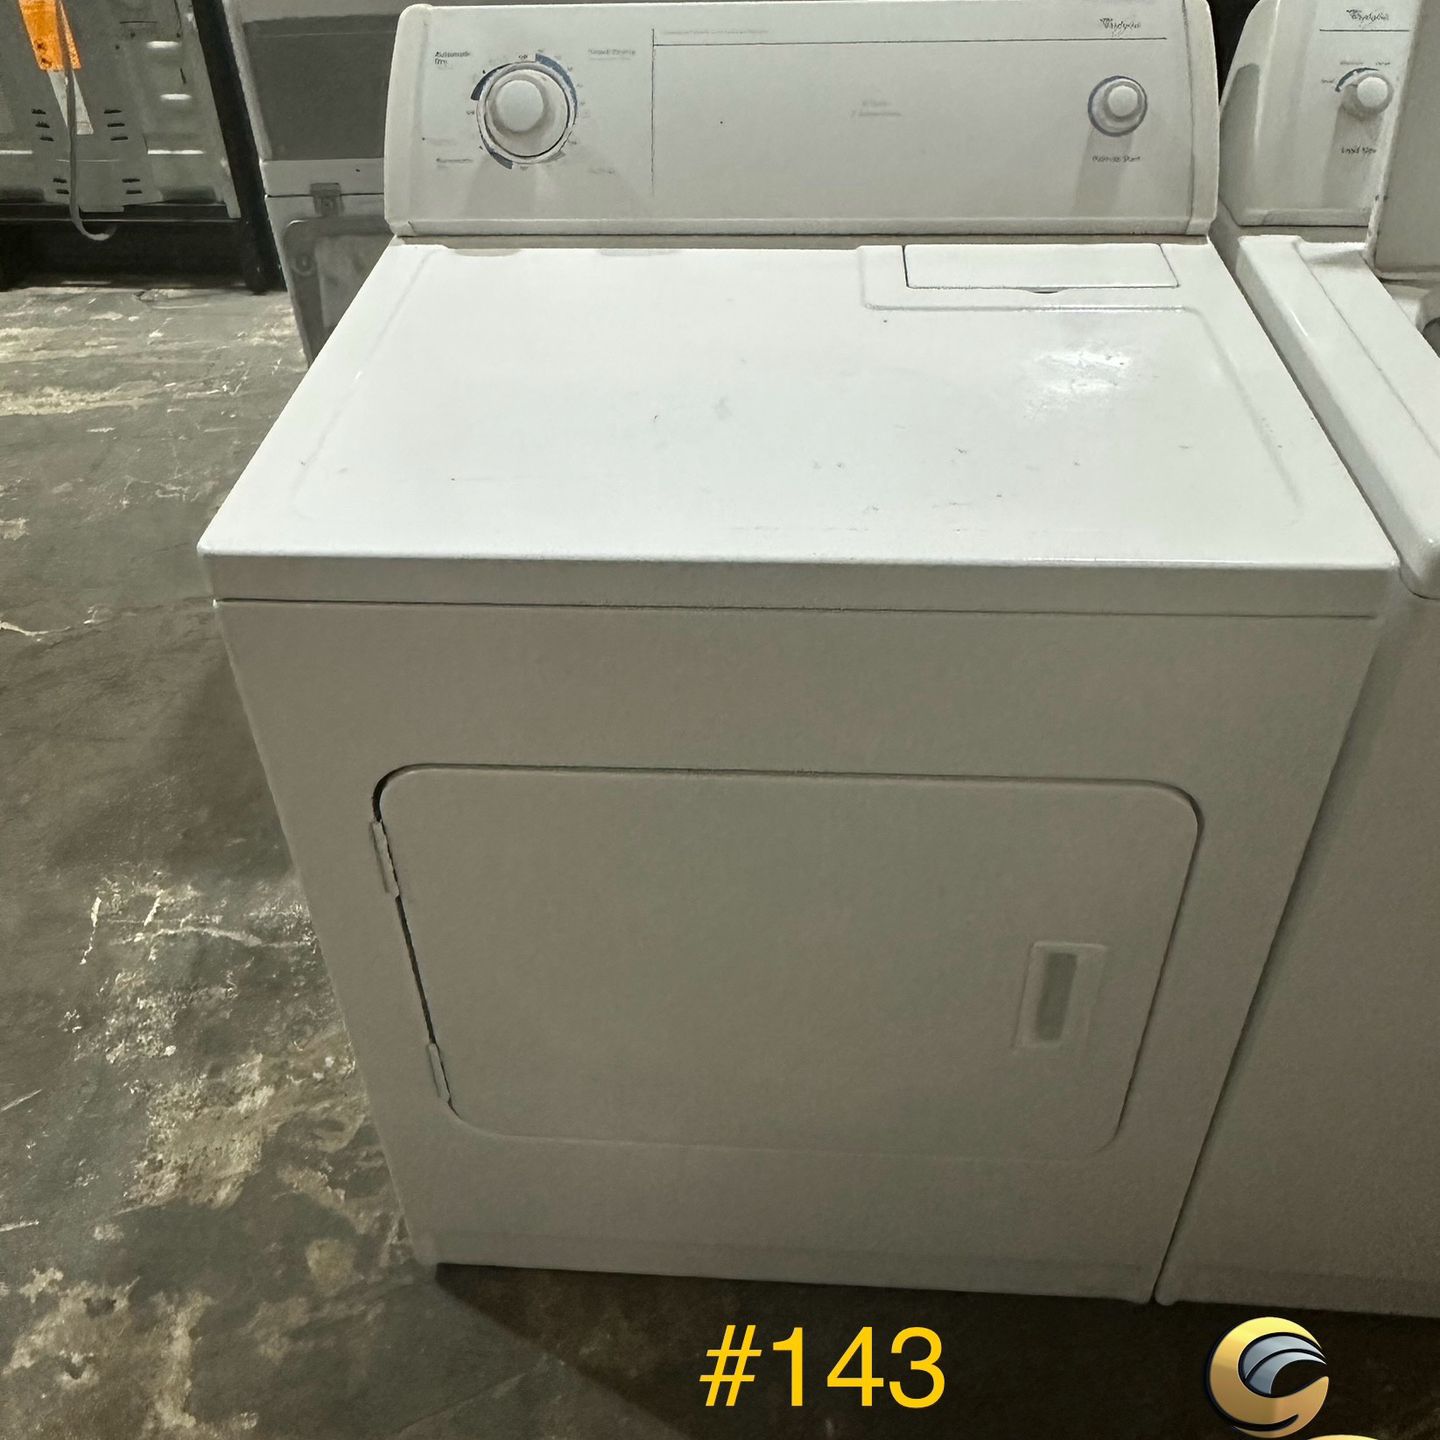 Whirlpool Dryer Electric (#143) 🚨$100 For PICKUP🚨$150 For DELIVERY 🚨